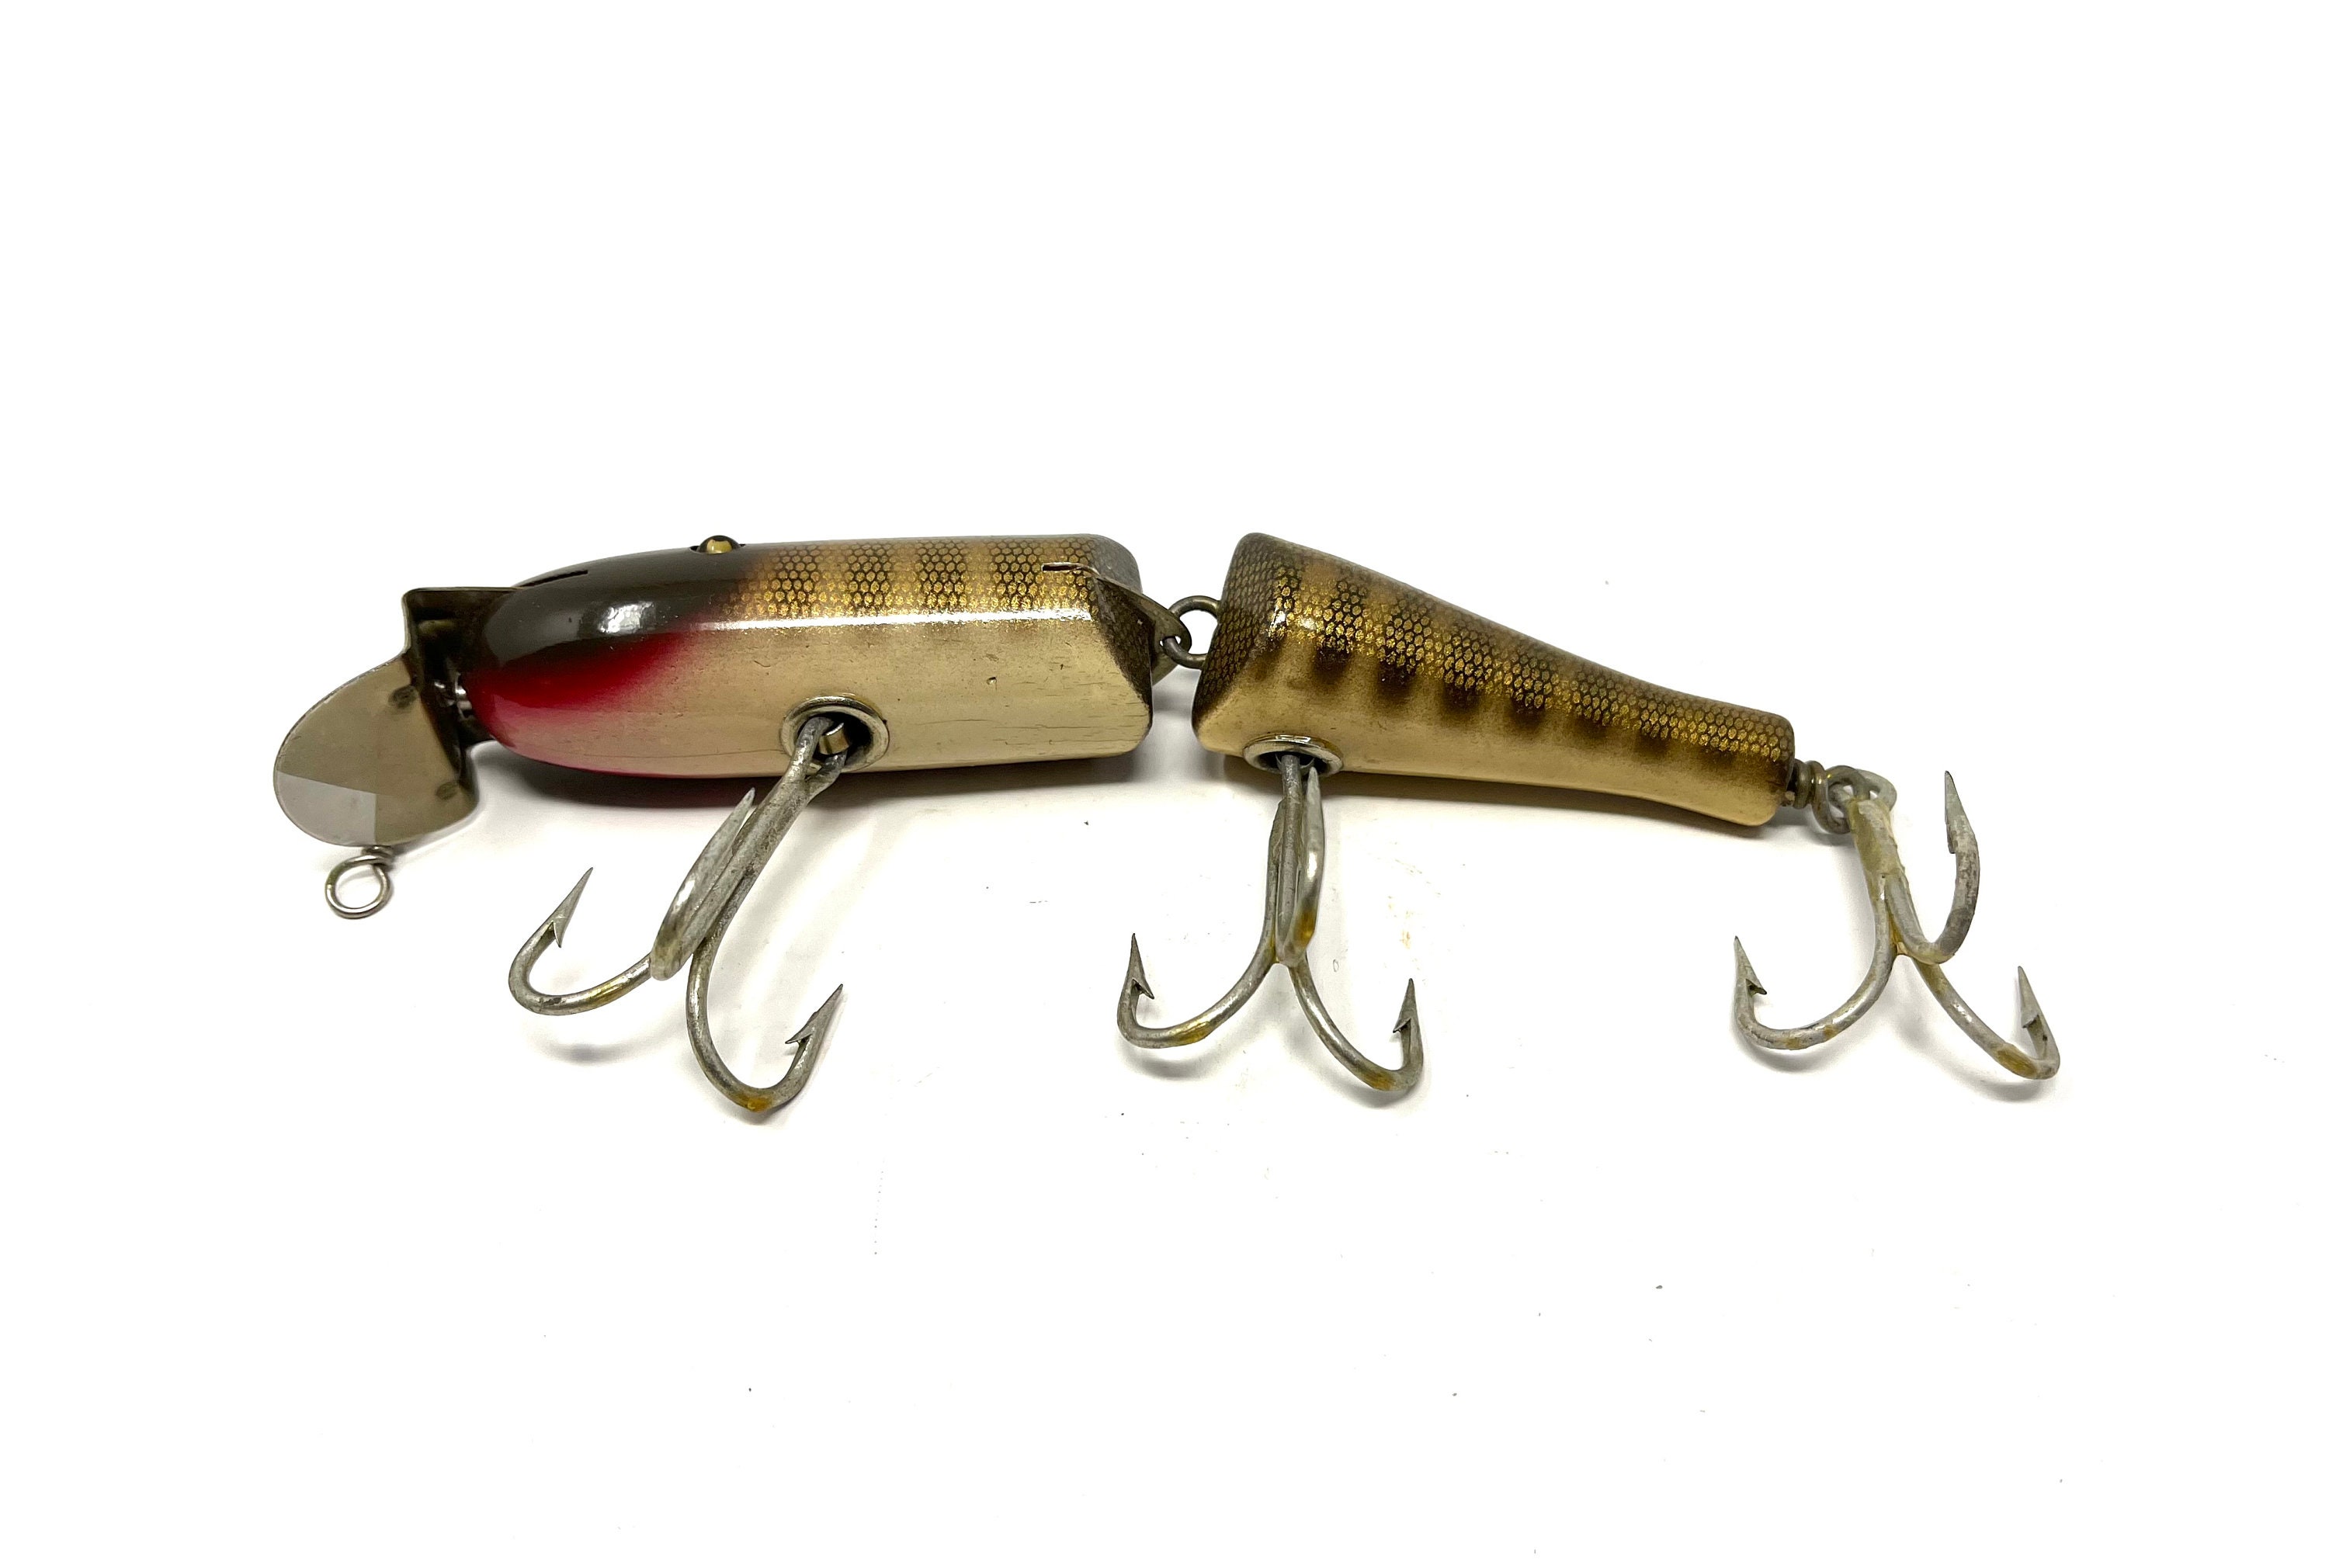 Brown Trout Jointed Wooden Handmade Spasm Fishing Lure 7cm/2.75